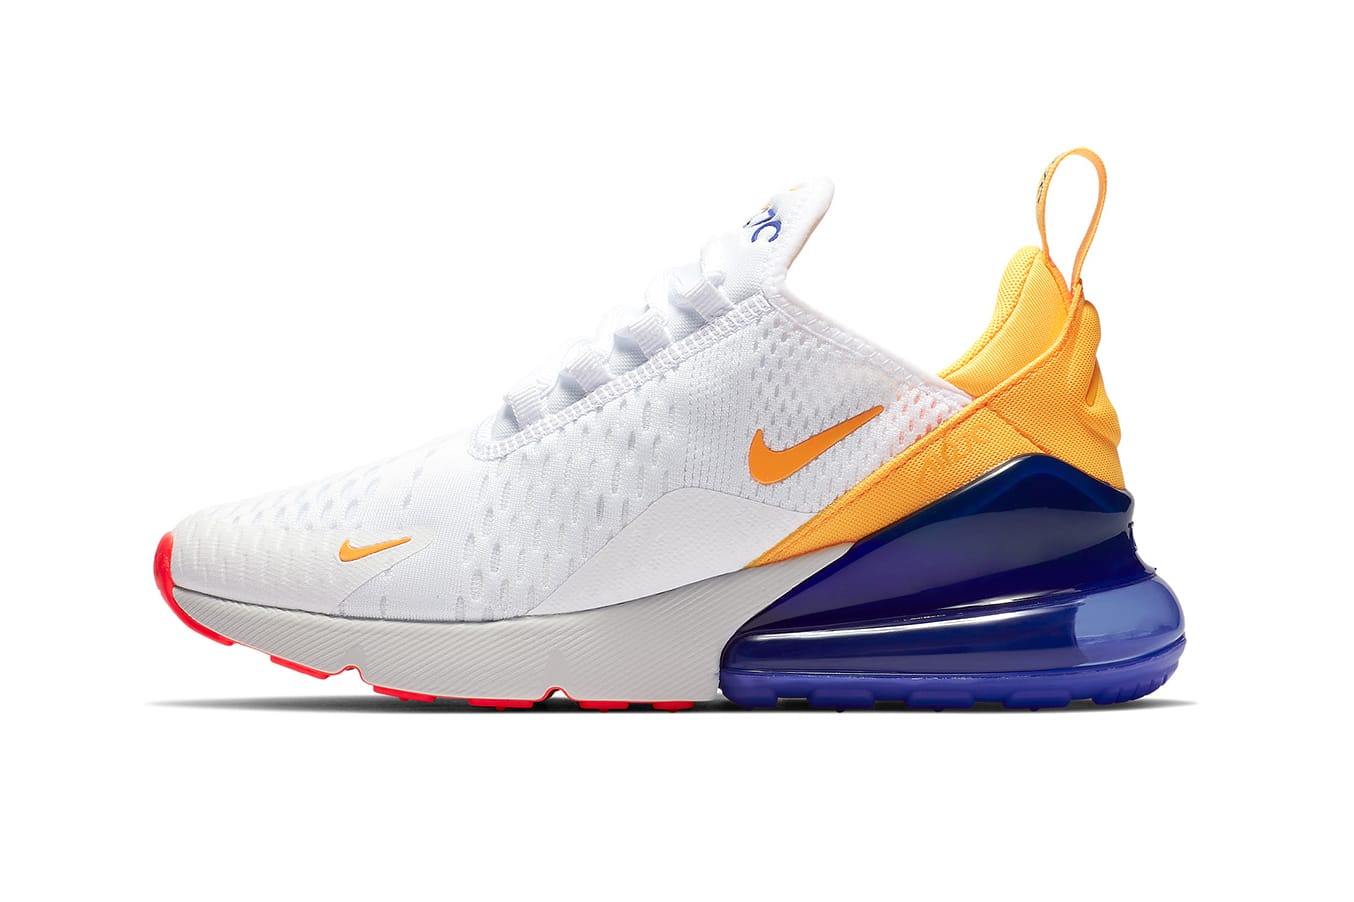 Nike Unveils Air Max 270 Inspired By 